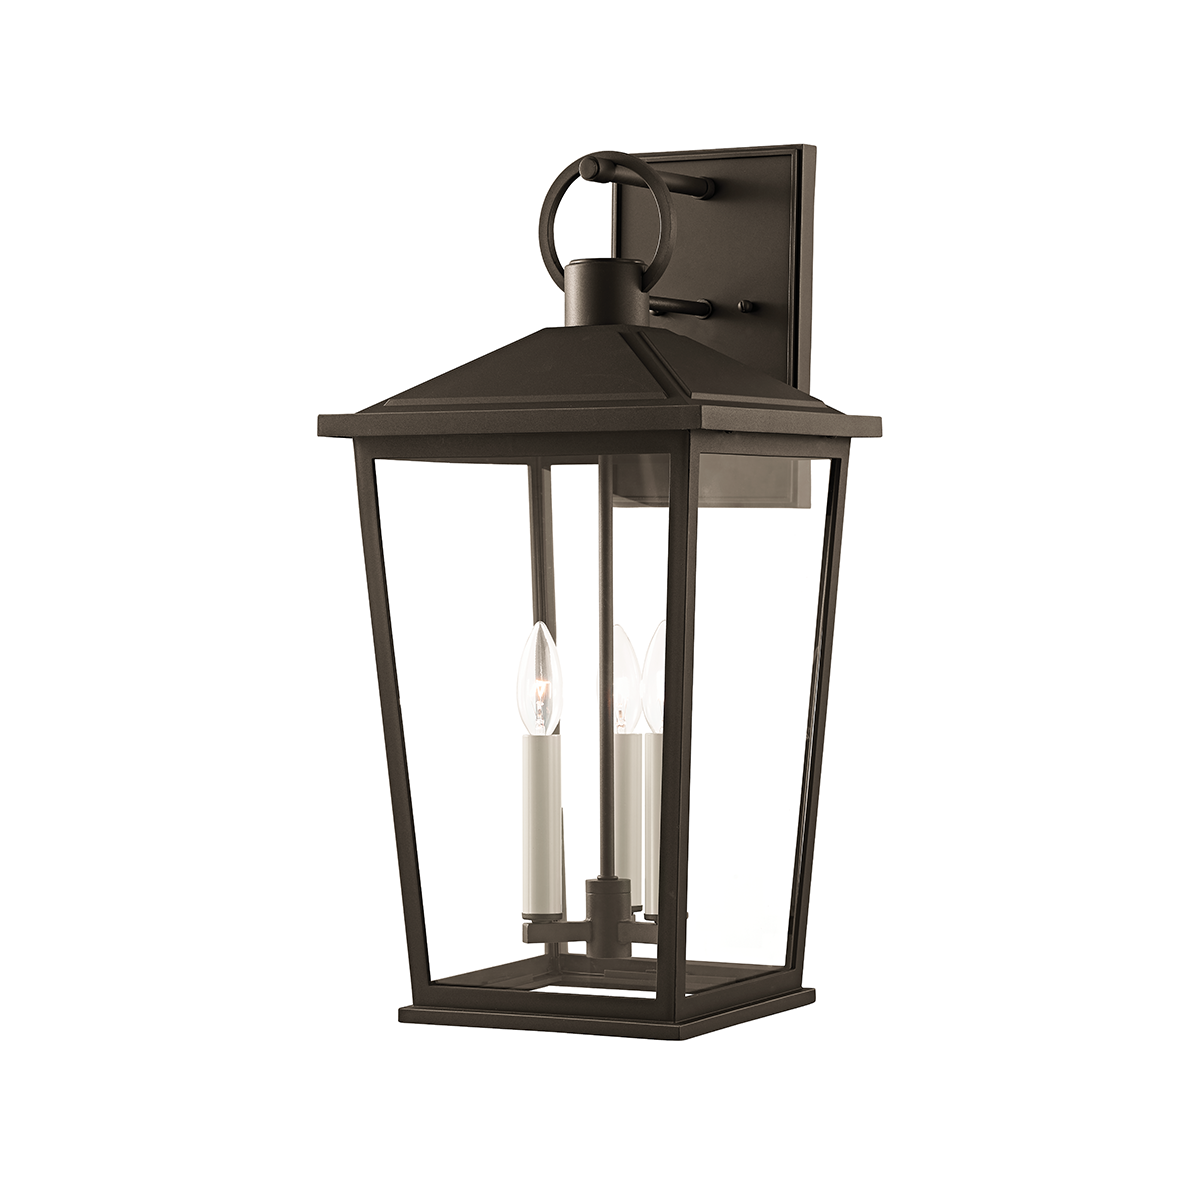 Troy SOREN 3 LIGHT LARGE EXTERIOR WALL SCONCE B8903 Outdoor l Wall Troy Lighting TEXTURED BRONZE W/ HL  